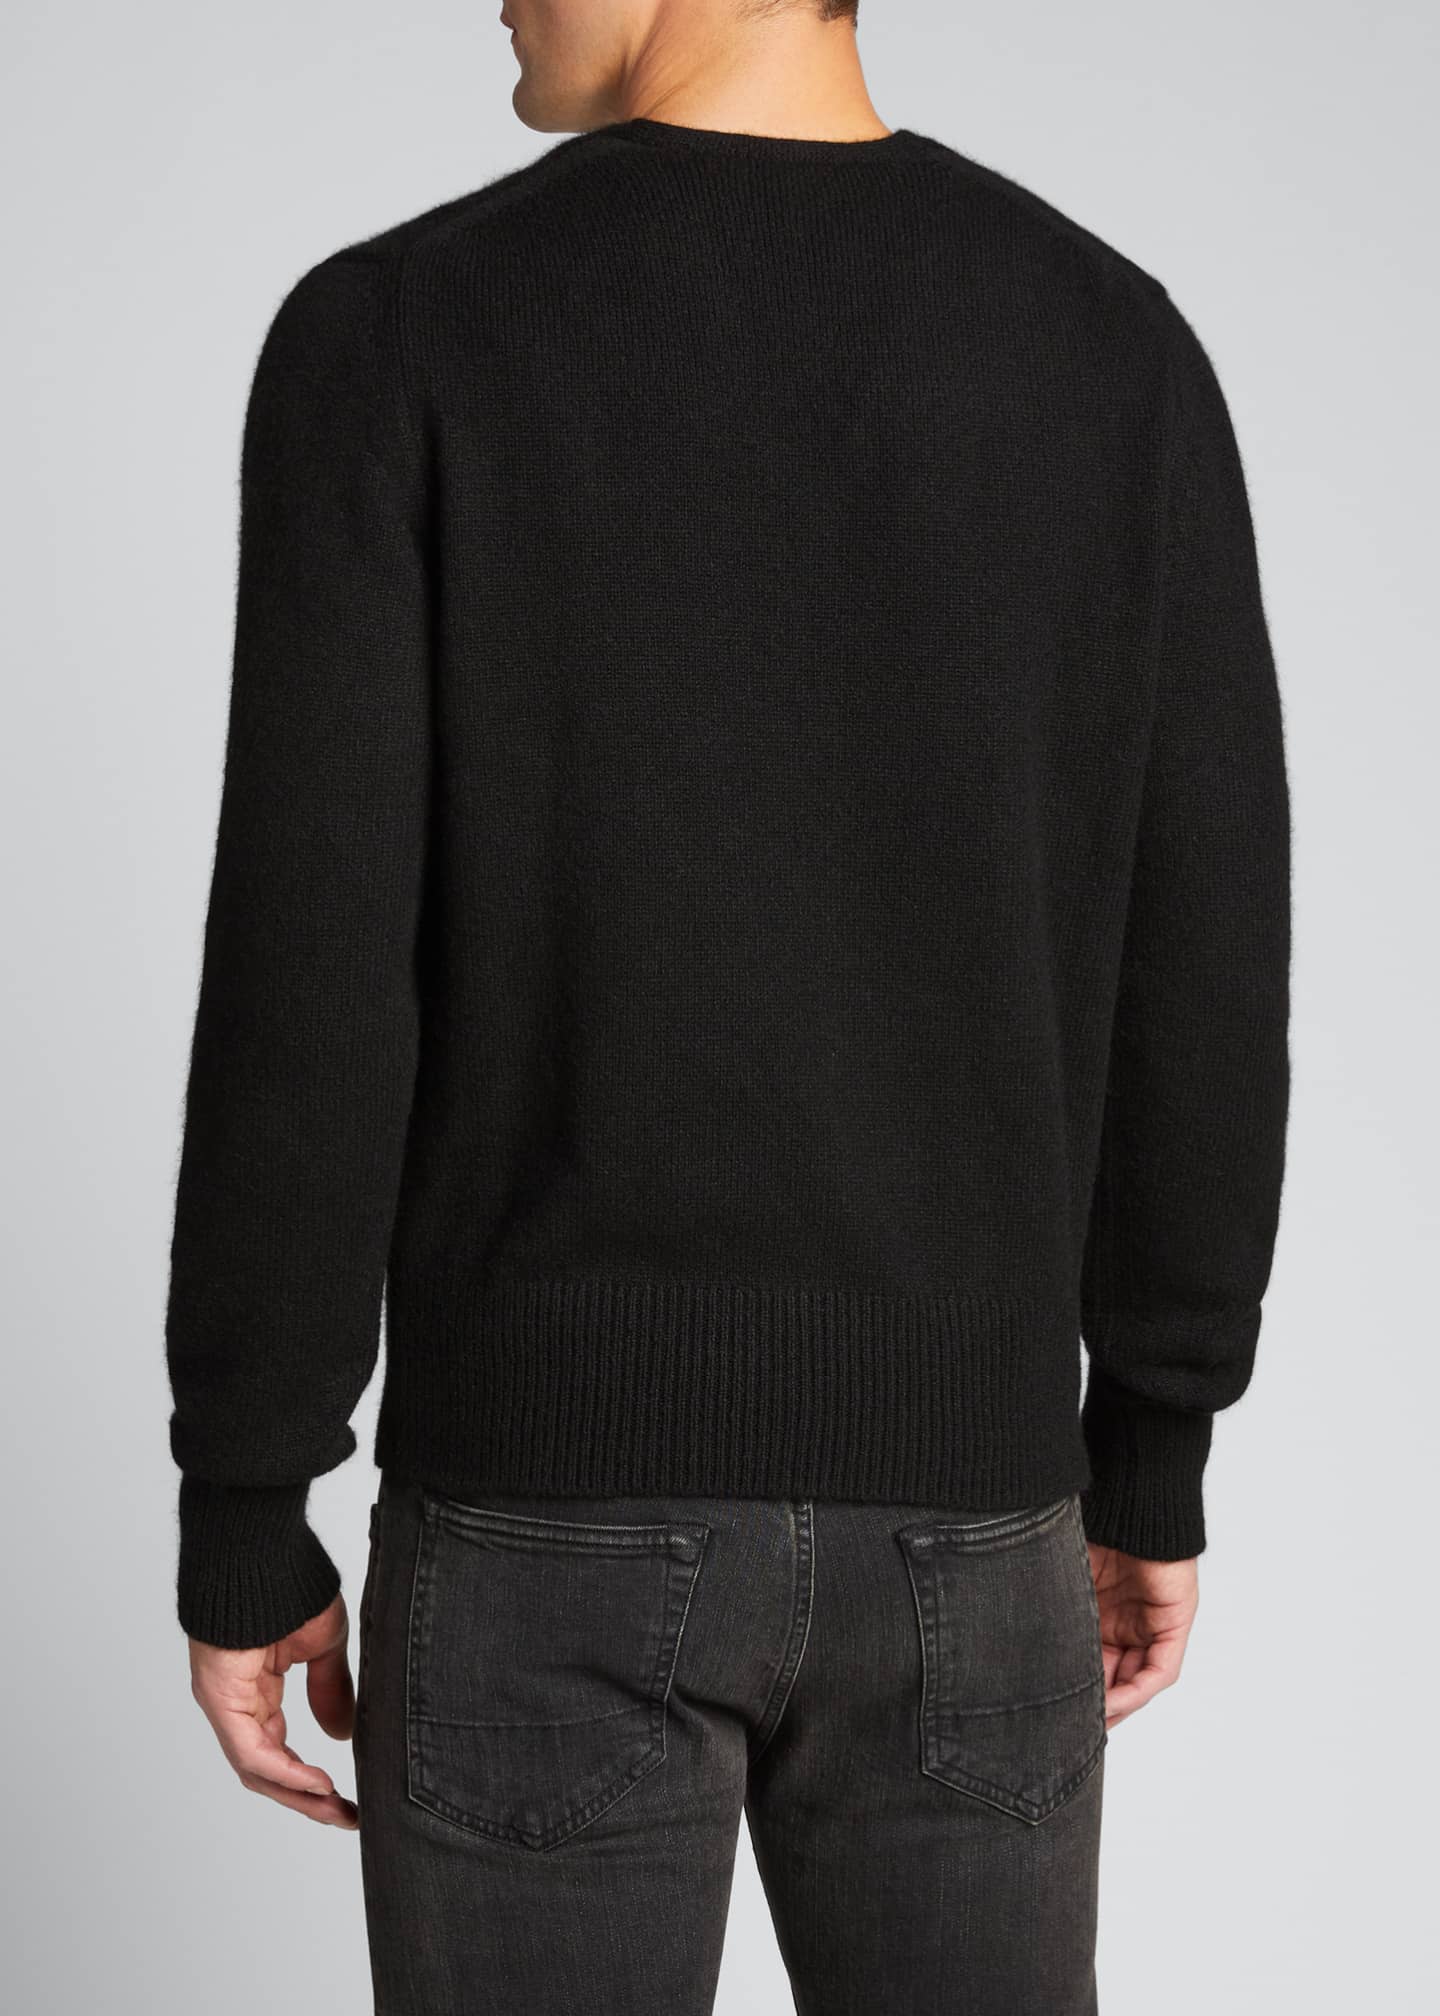 TOM FORD Men's Solid V-Neck Cashmere-Wool Knit Sweater - Bergdorf Goodman